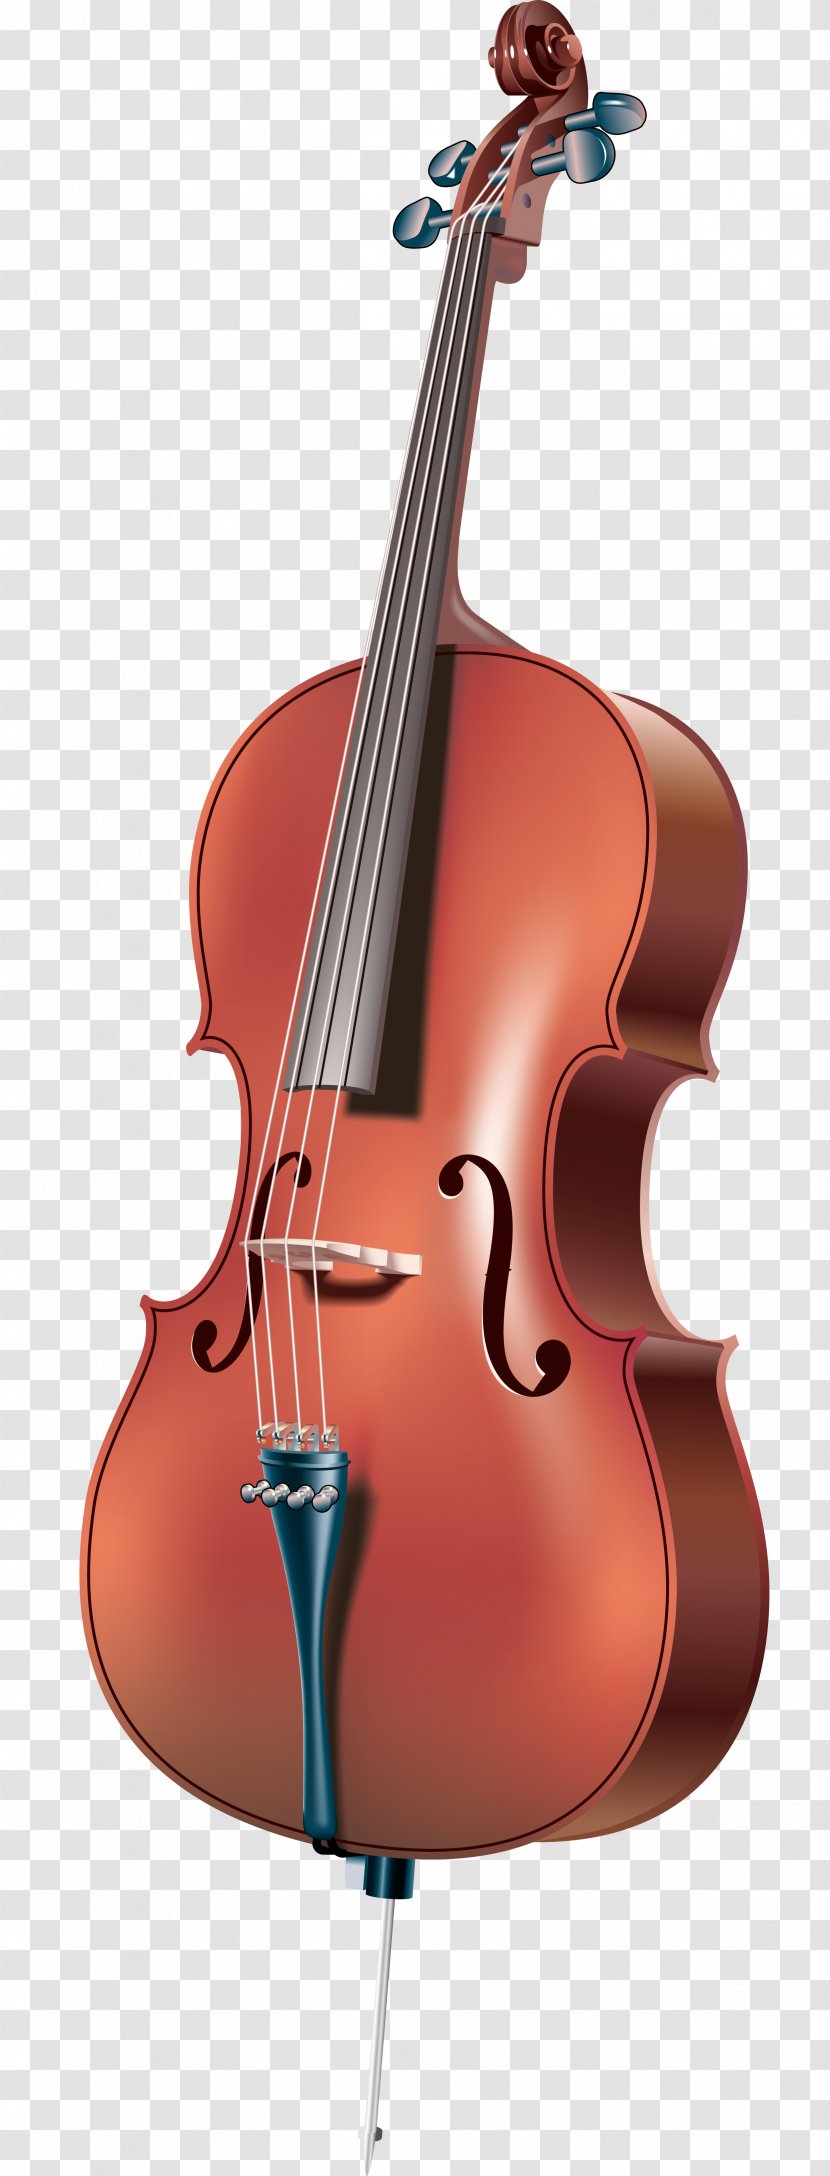 Cello Musical Instrument Cellist Icon - Silhouette - Realistic Violin Vector Transparent PNG